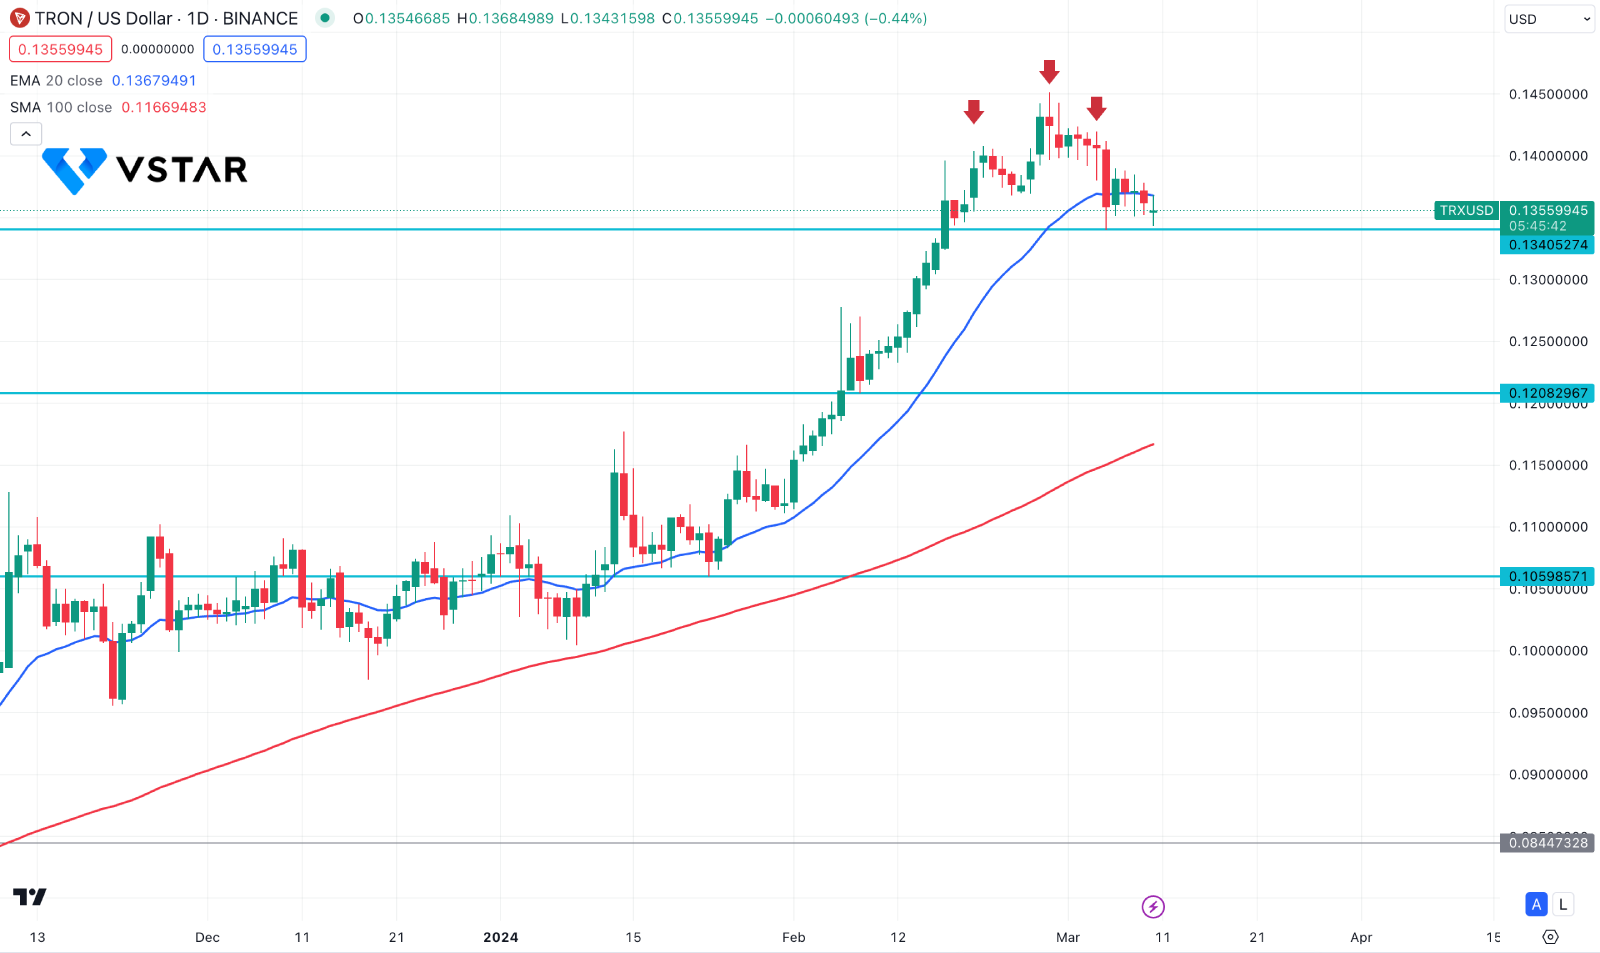 Tron (TRX) Looks A Selling Pressure From The Technical Pattern